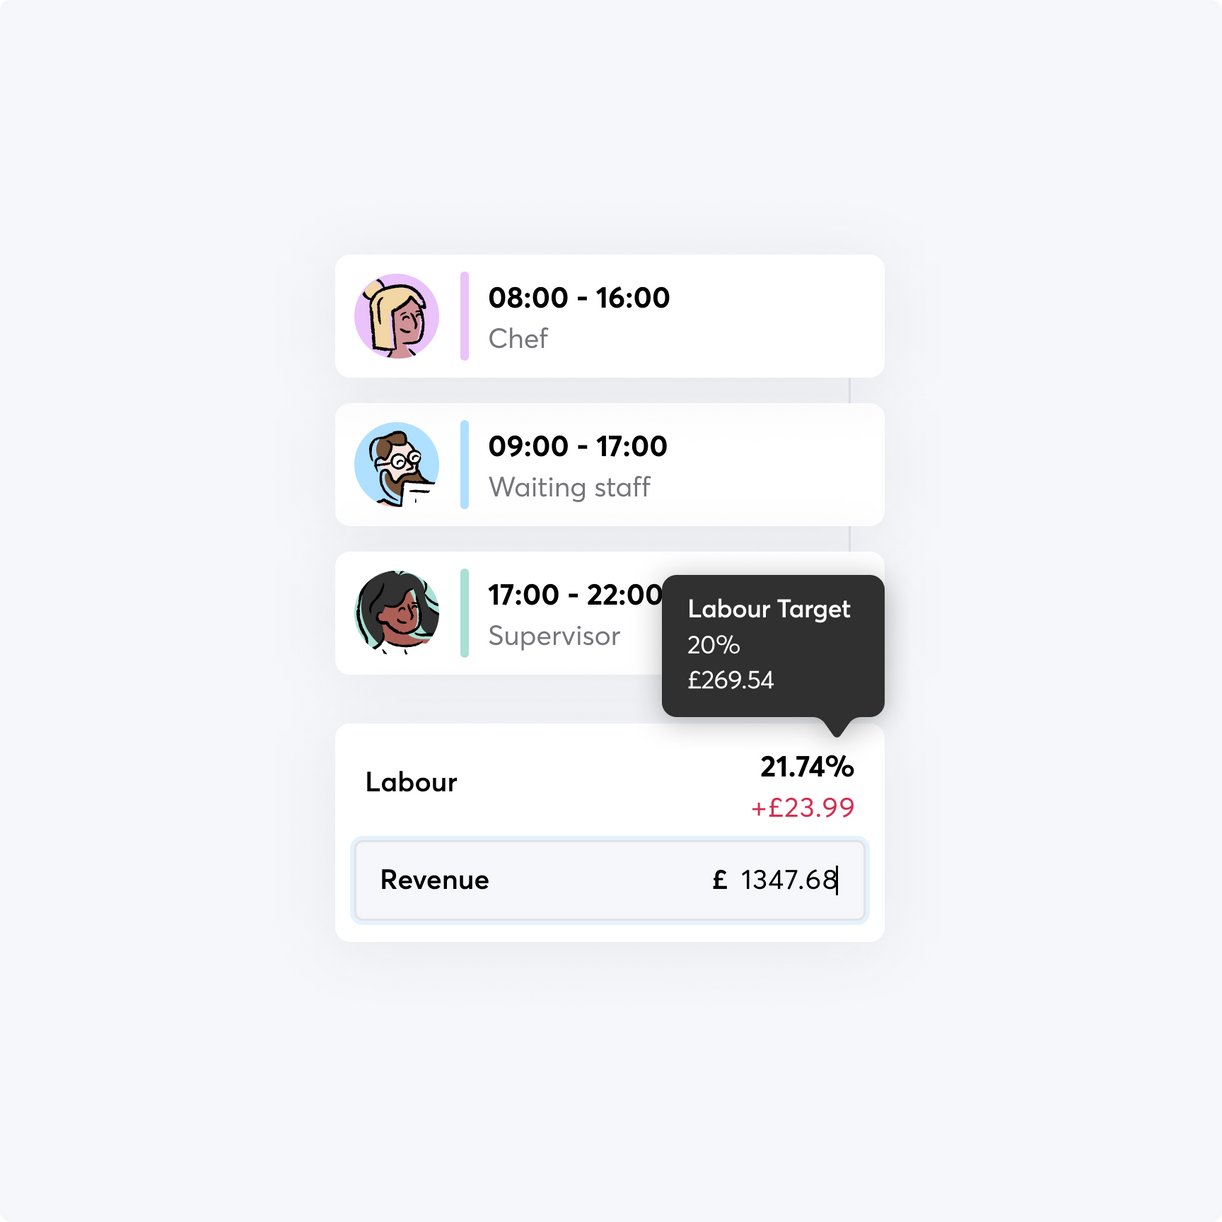 A section of a rota in RotaCloud showing labour target of 20% £269.54, together with current labour spend and revenue.